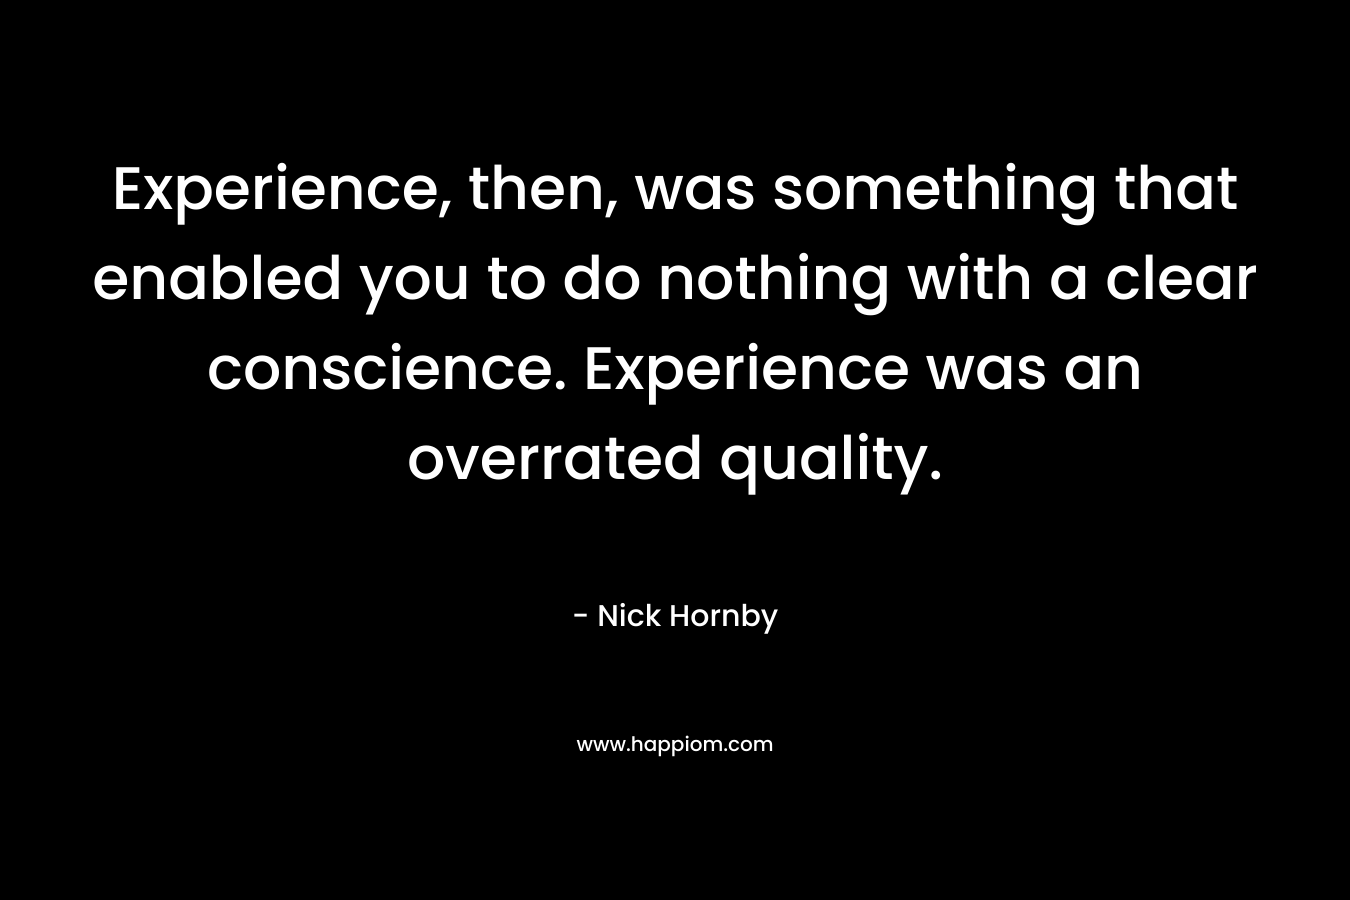 Experience, then, was something that enabled you to do nothing with a clear conscience. Experience was an overrated quality. – Nick Hornby